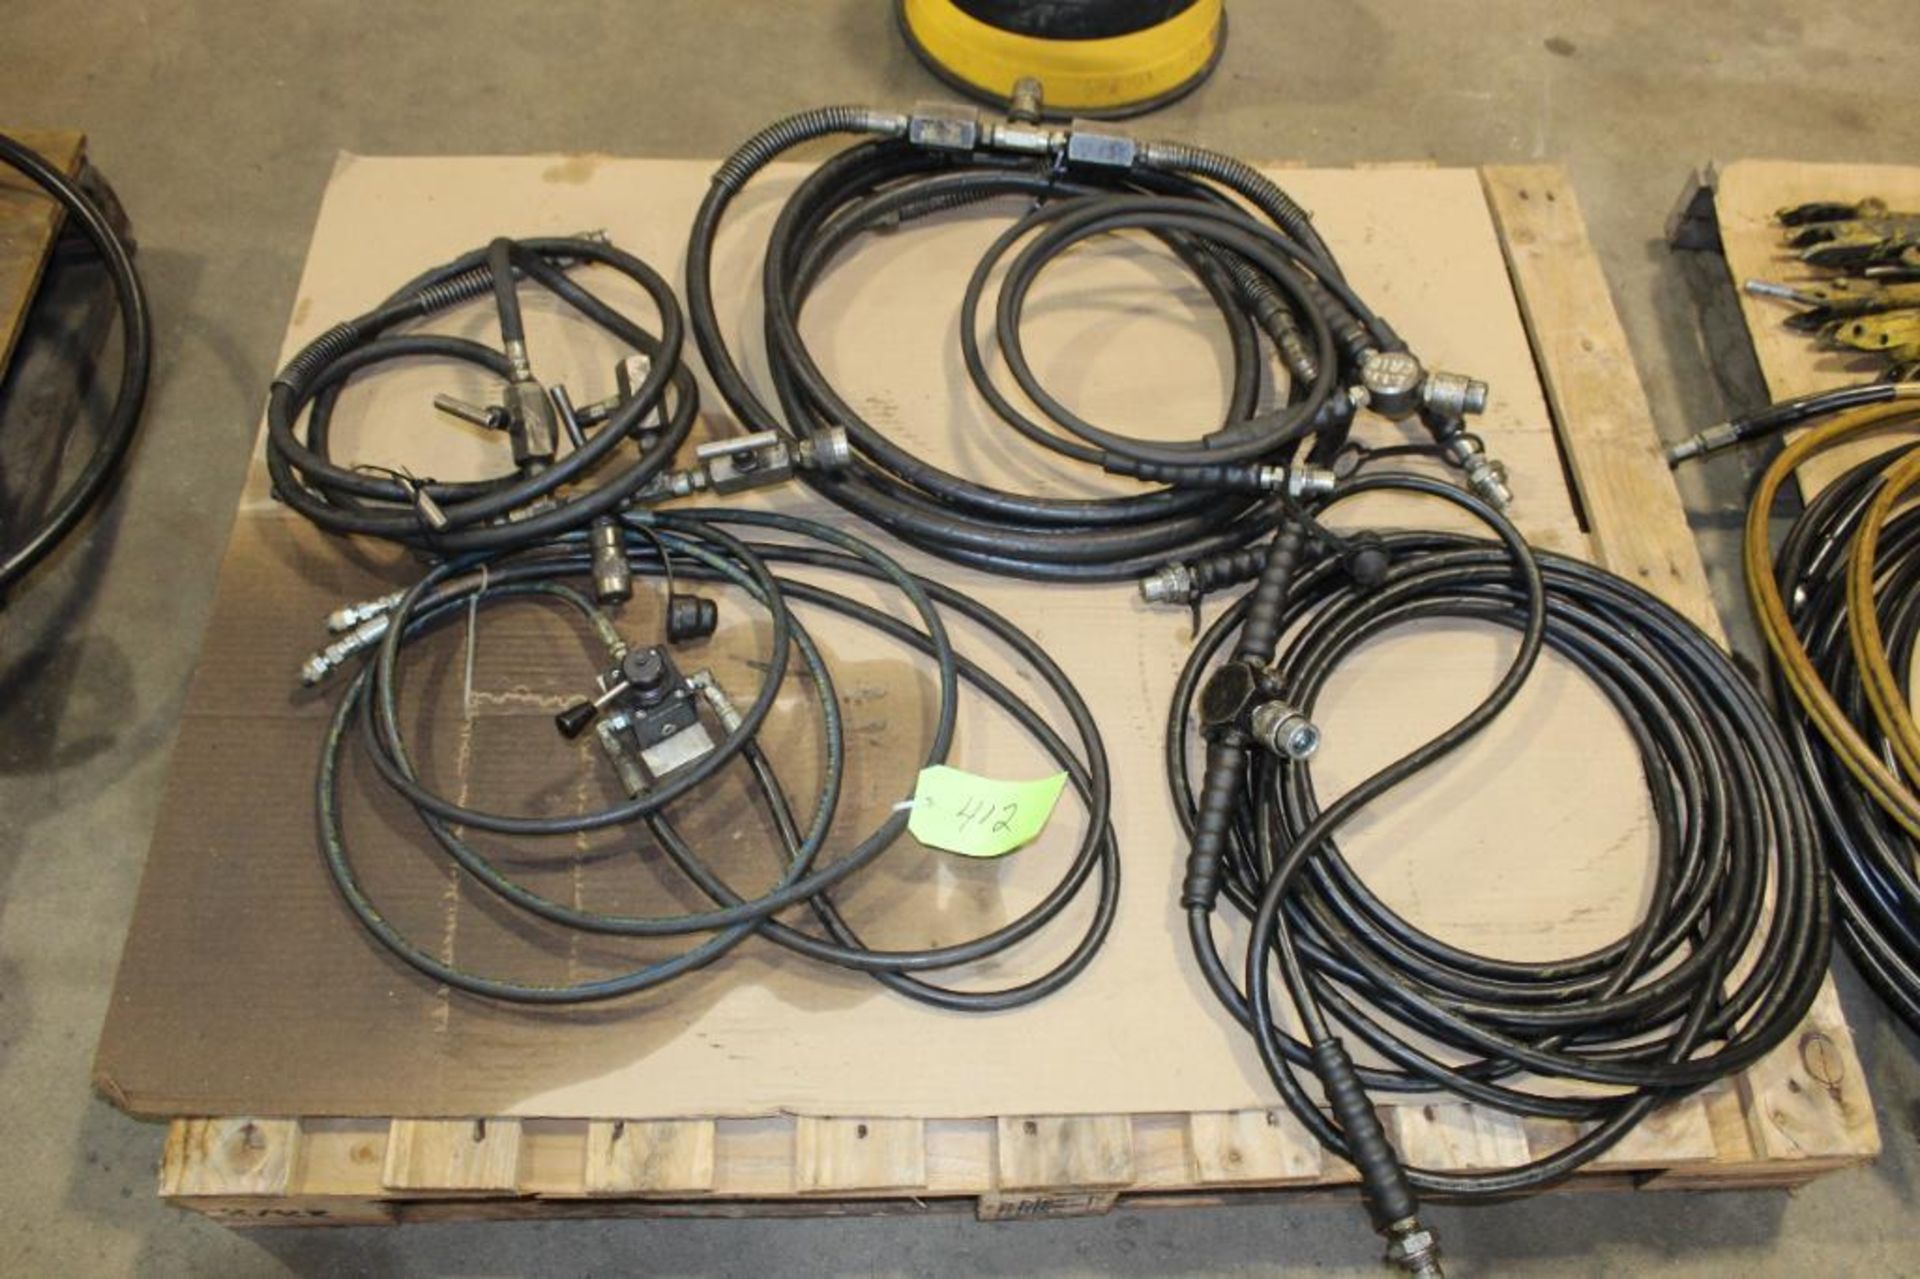 Lot of (5) Enterpac Hoses For Hydraulic Pumps w/ Splitters and Directional Valves - Image 3 of 6